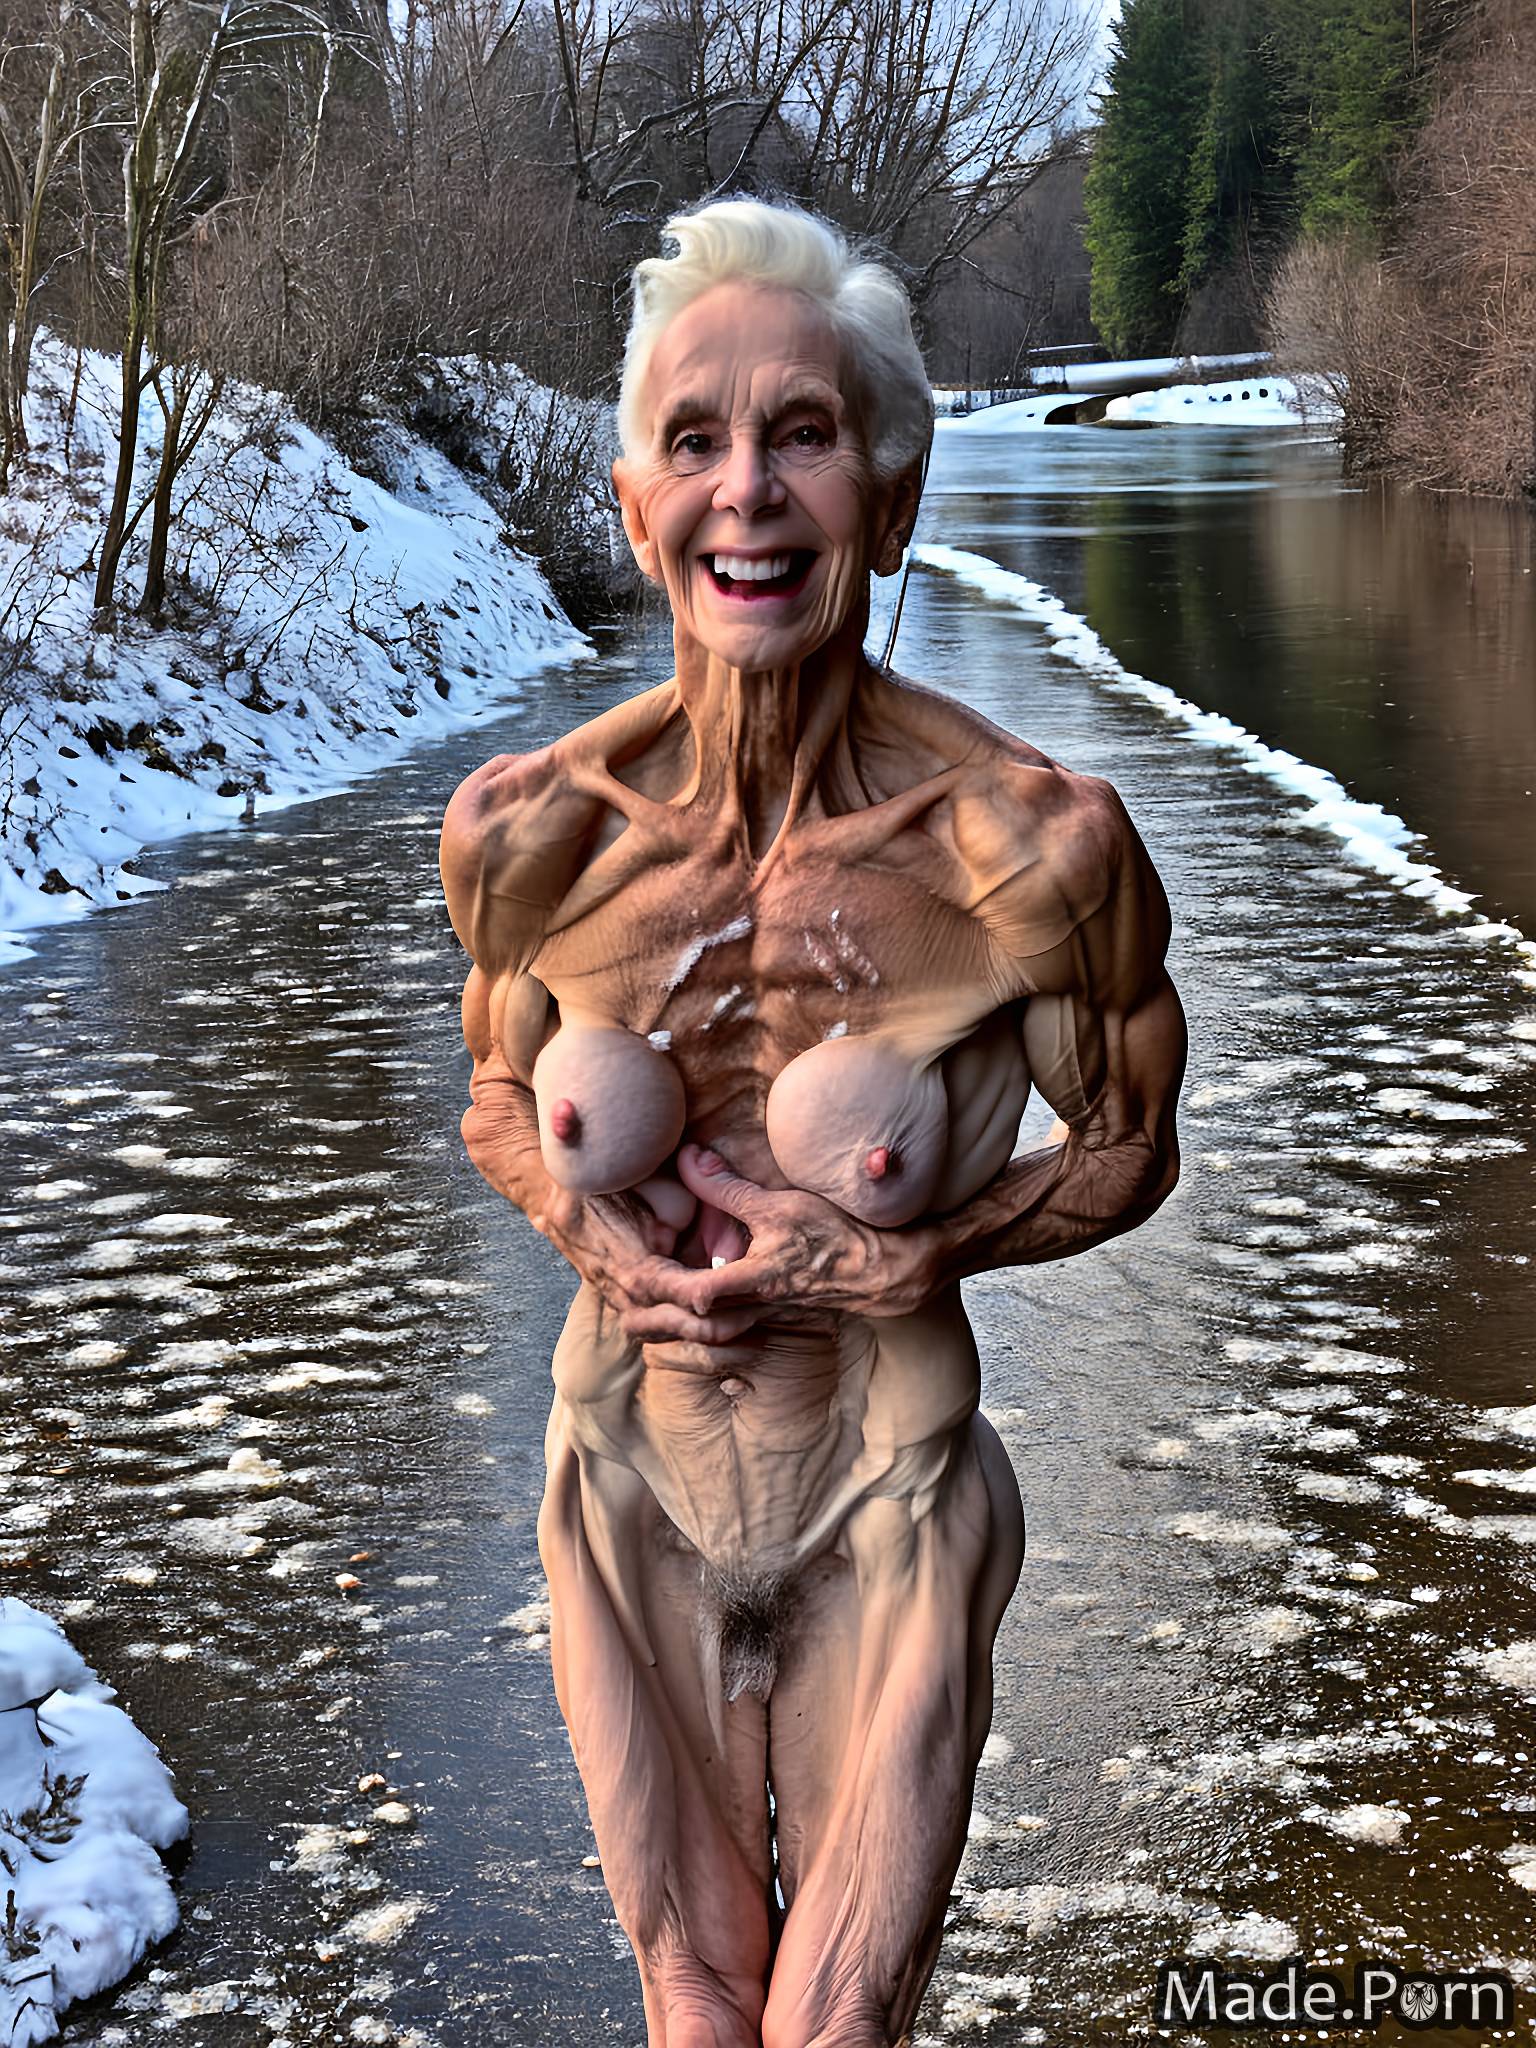 screaming bodybuilder french snowfall muscular nude small tits